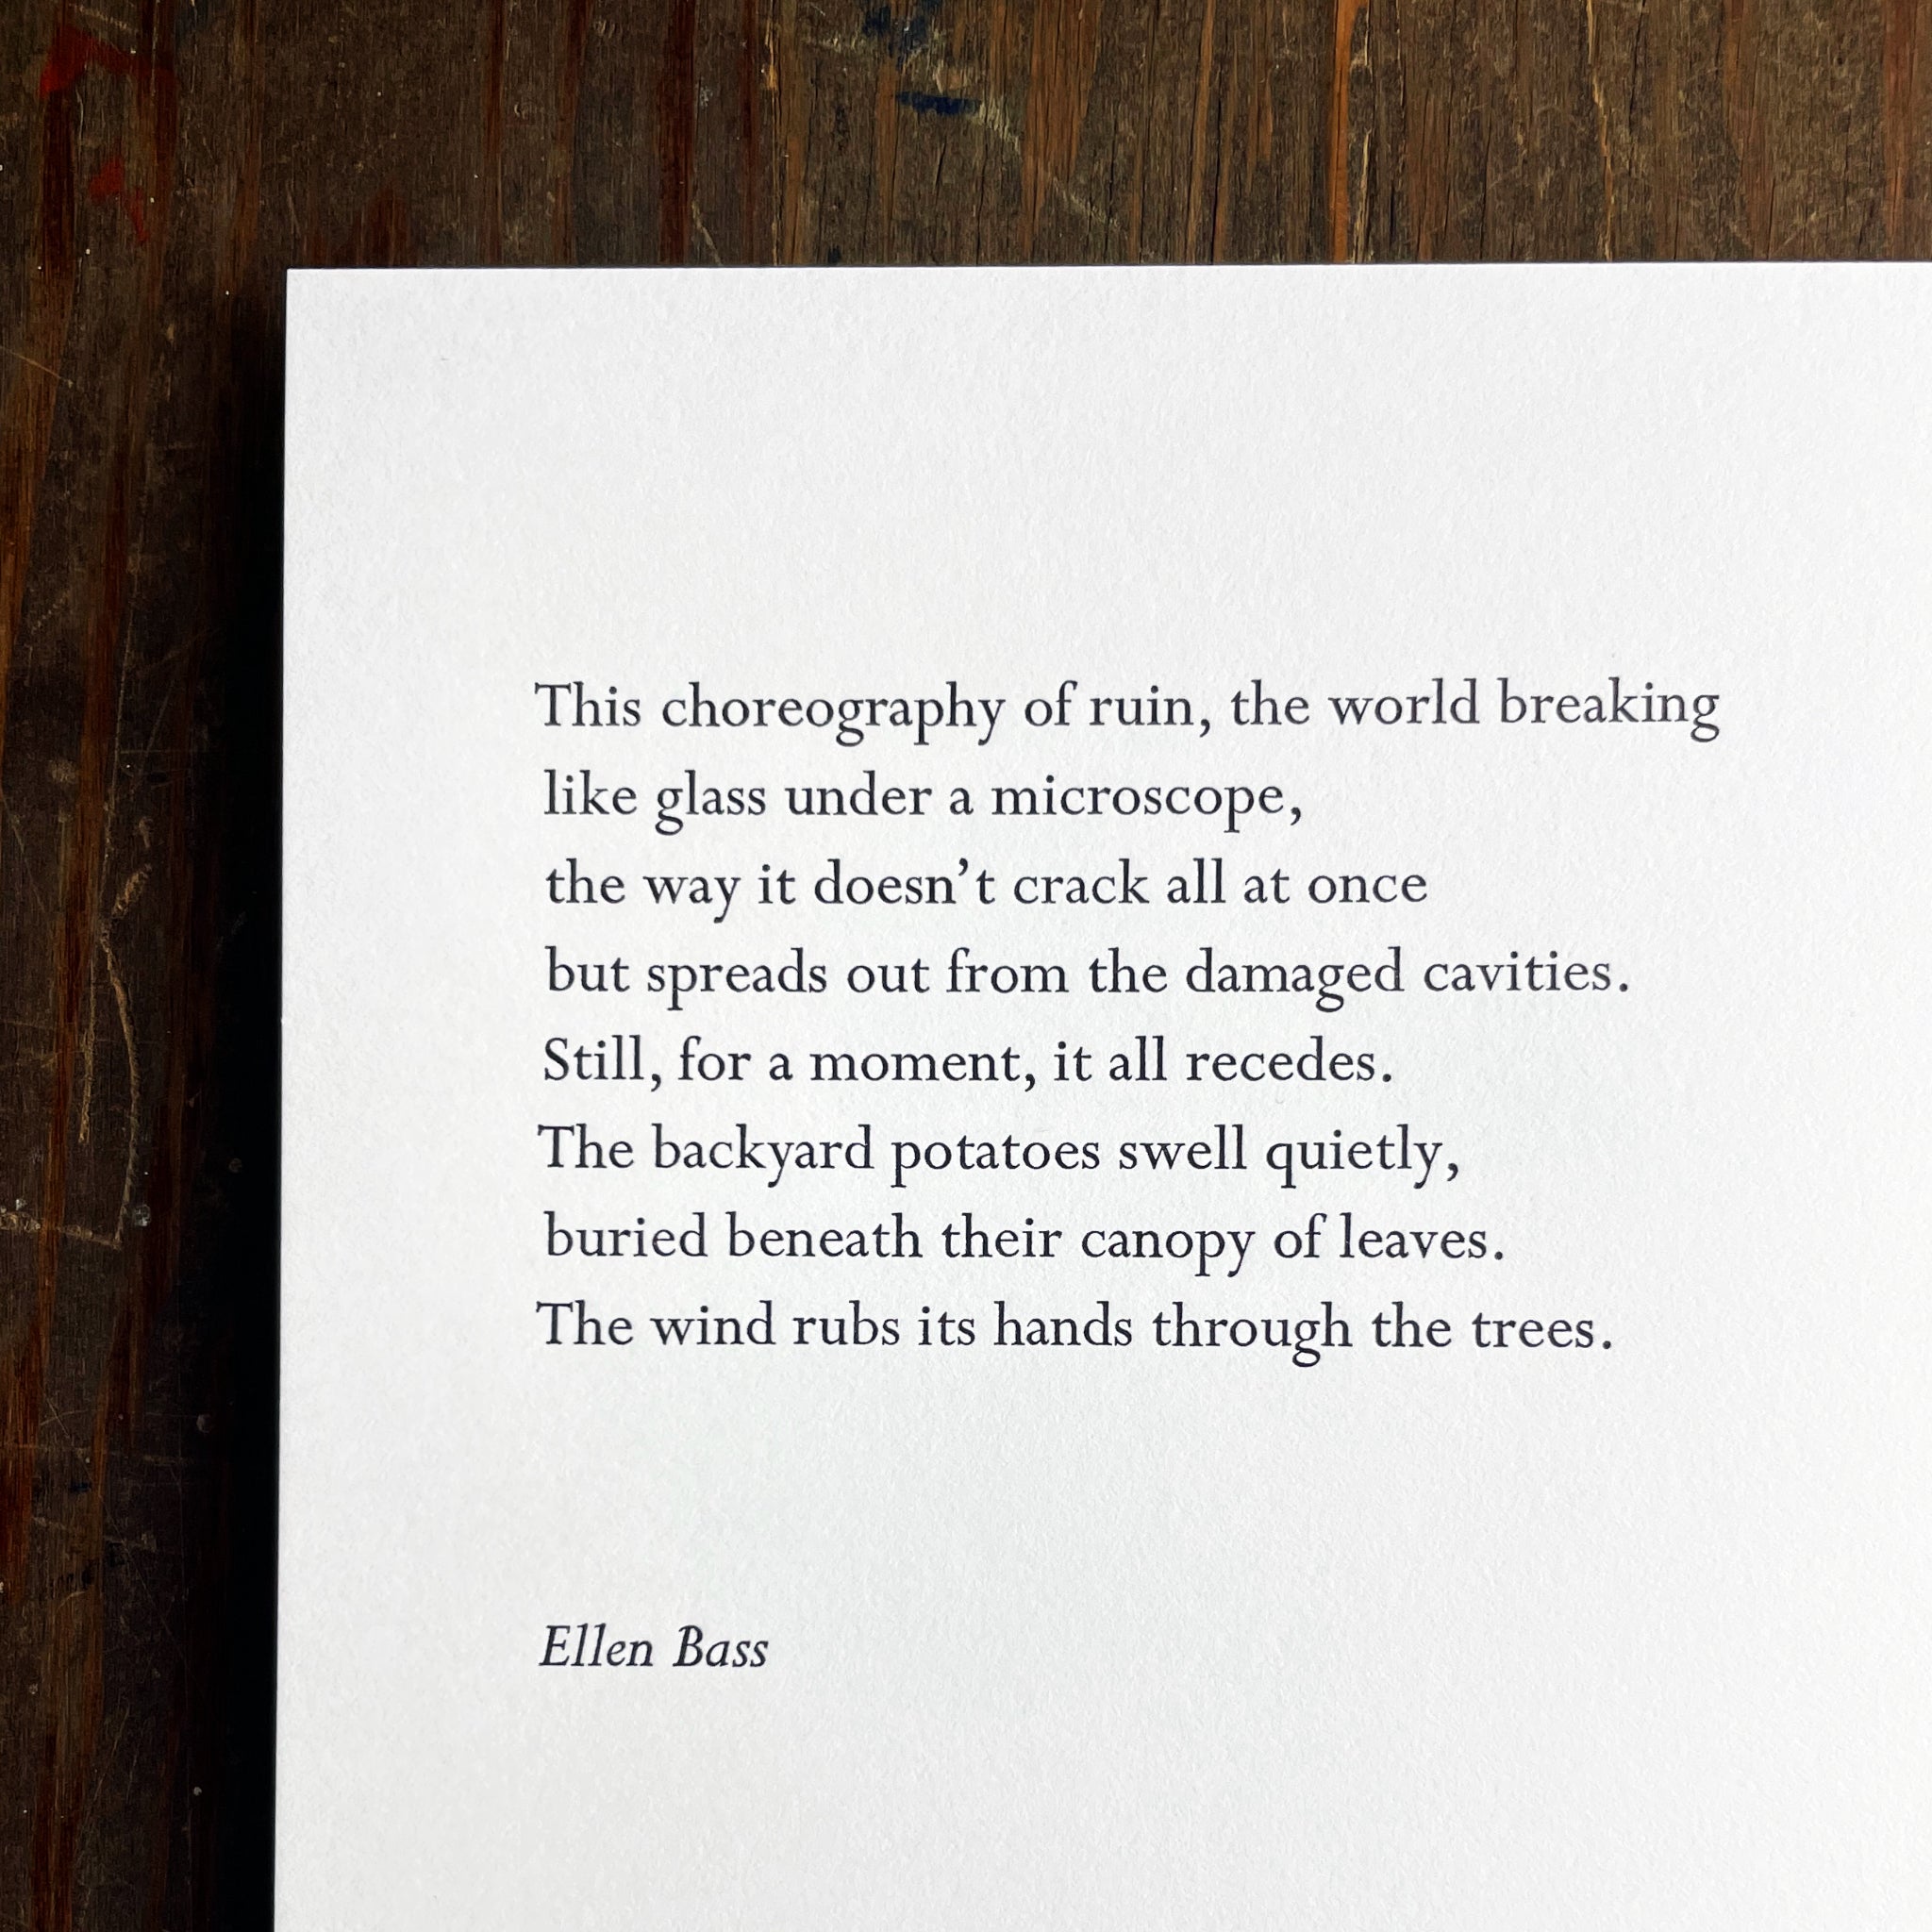 Choreography of Ruin close up, by Ellen Bass